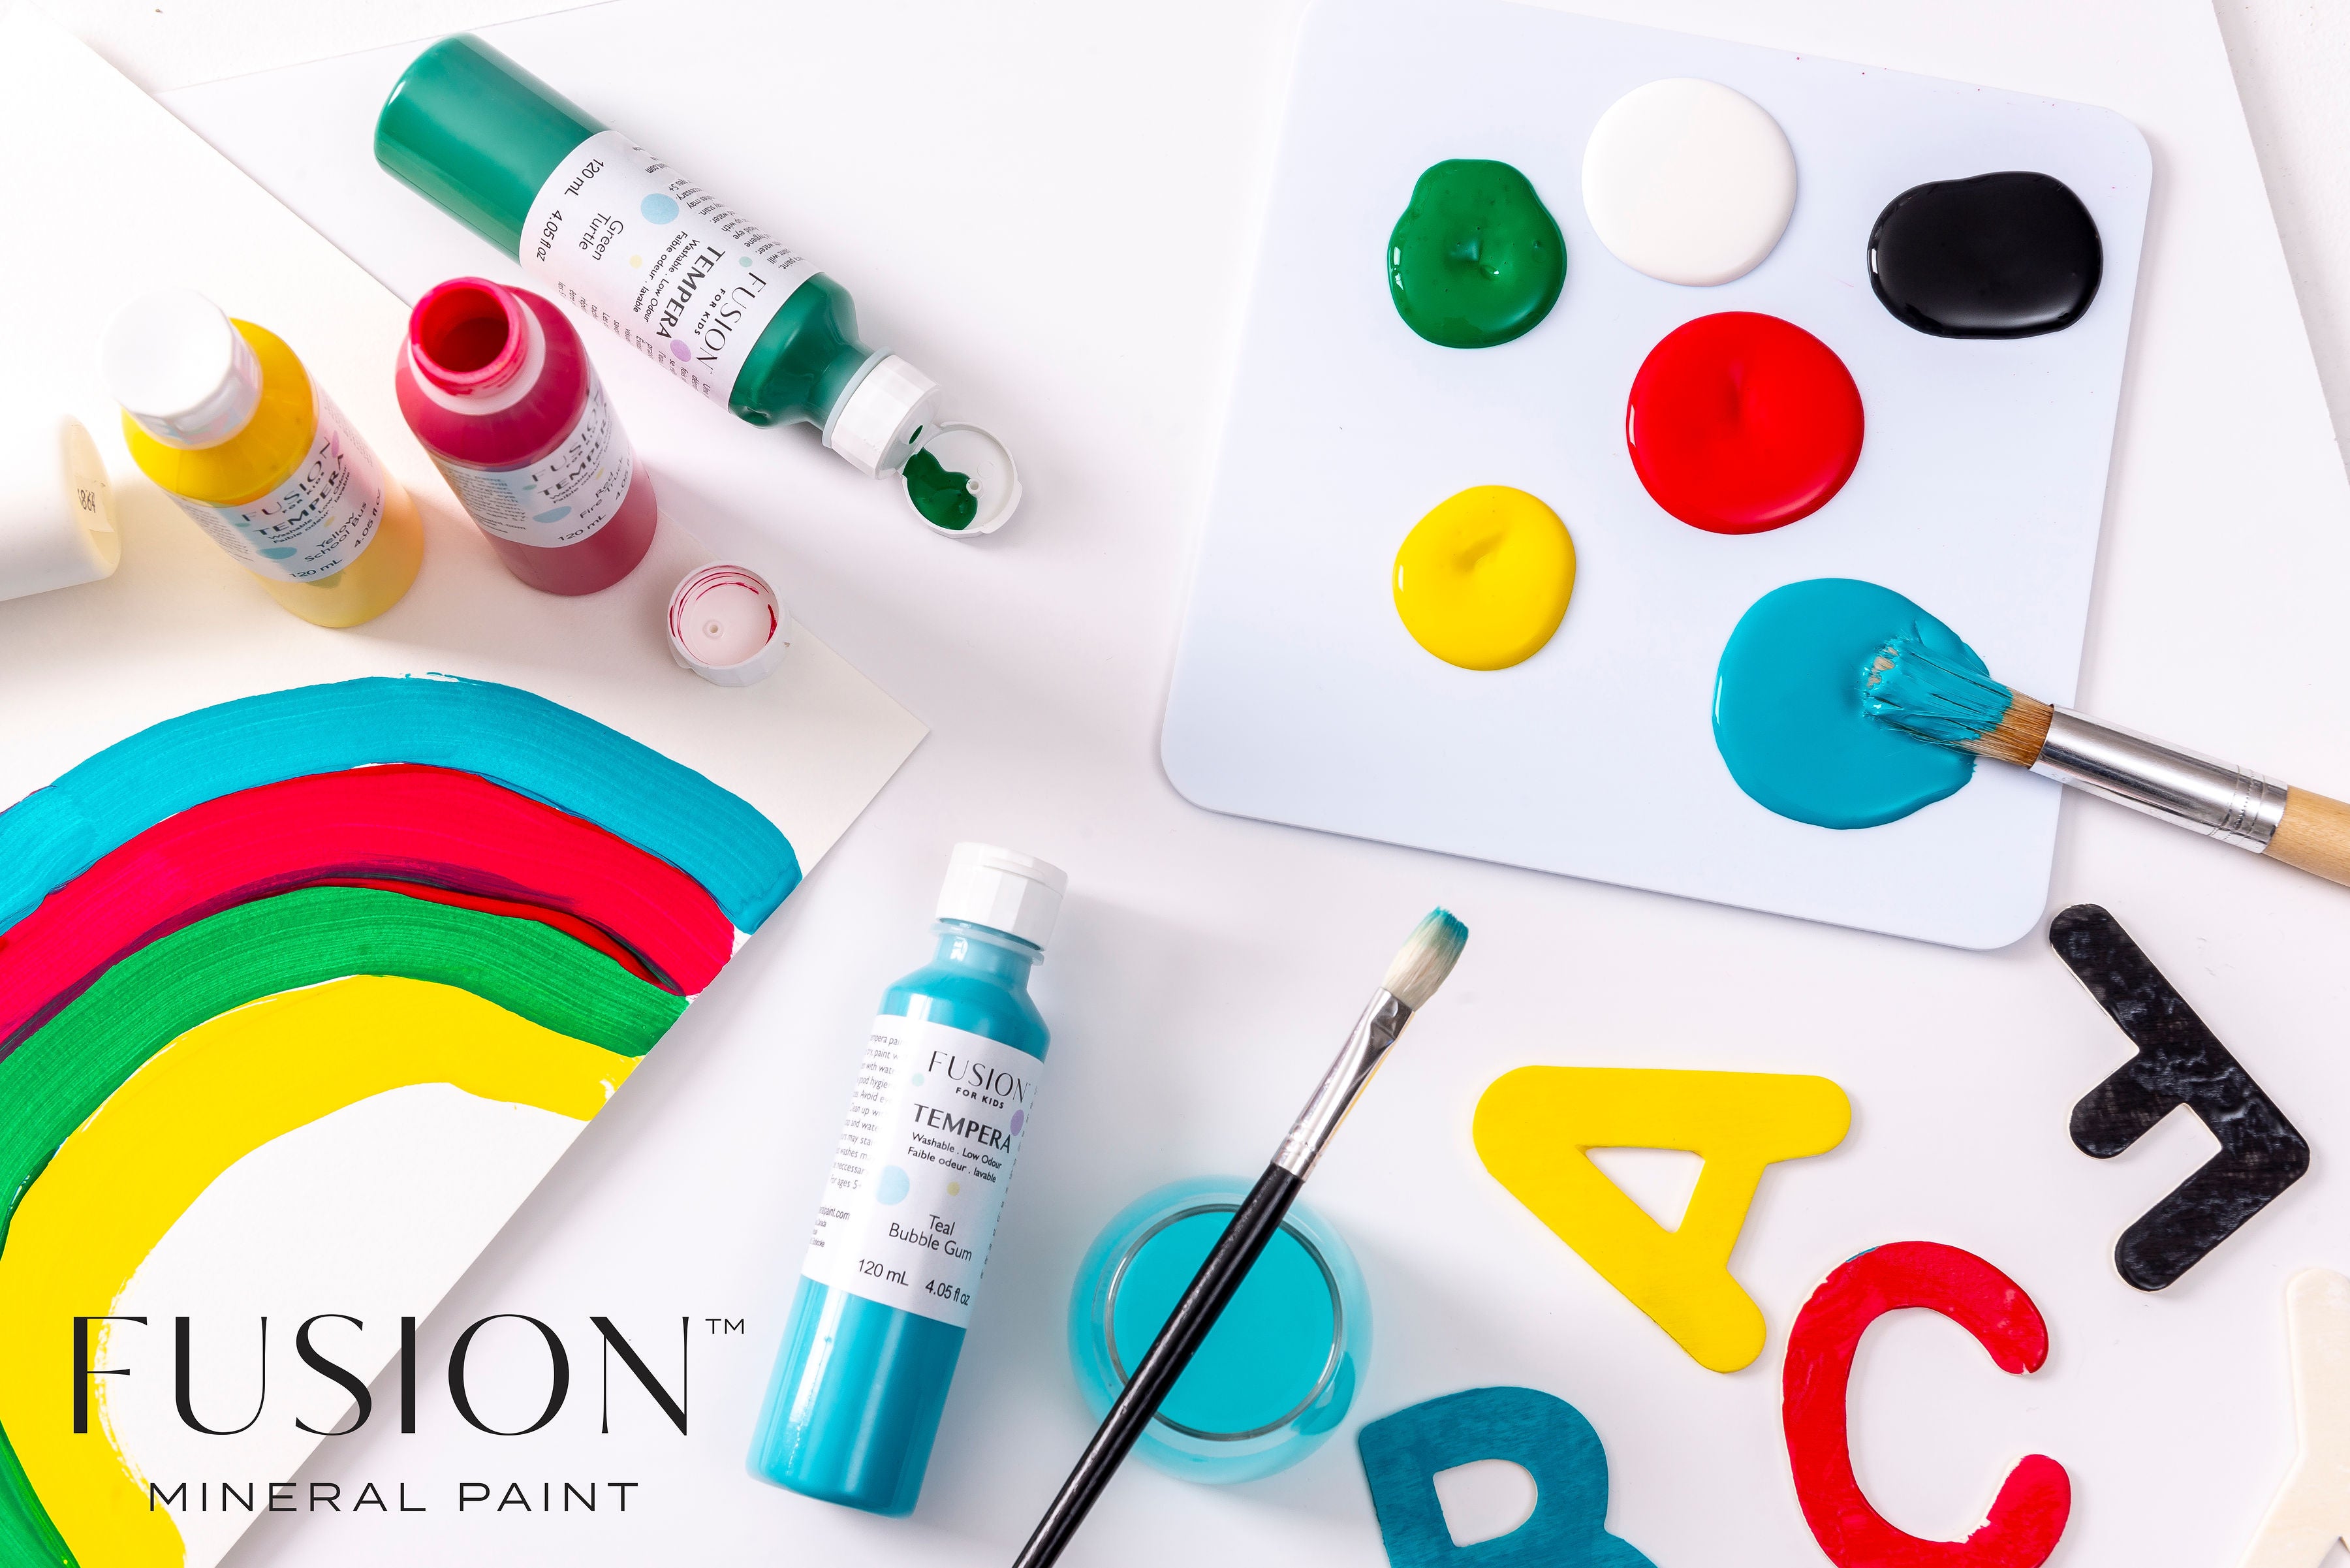 Fusion For Kids Tempera Kit - Rainbow Pack